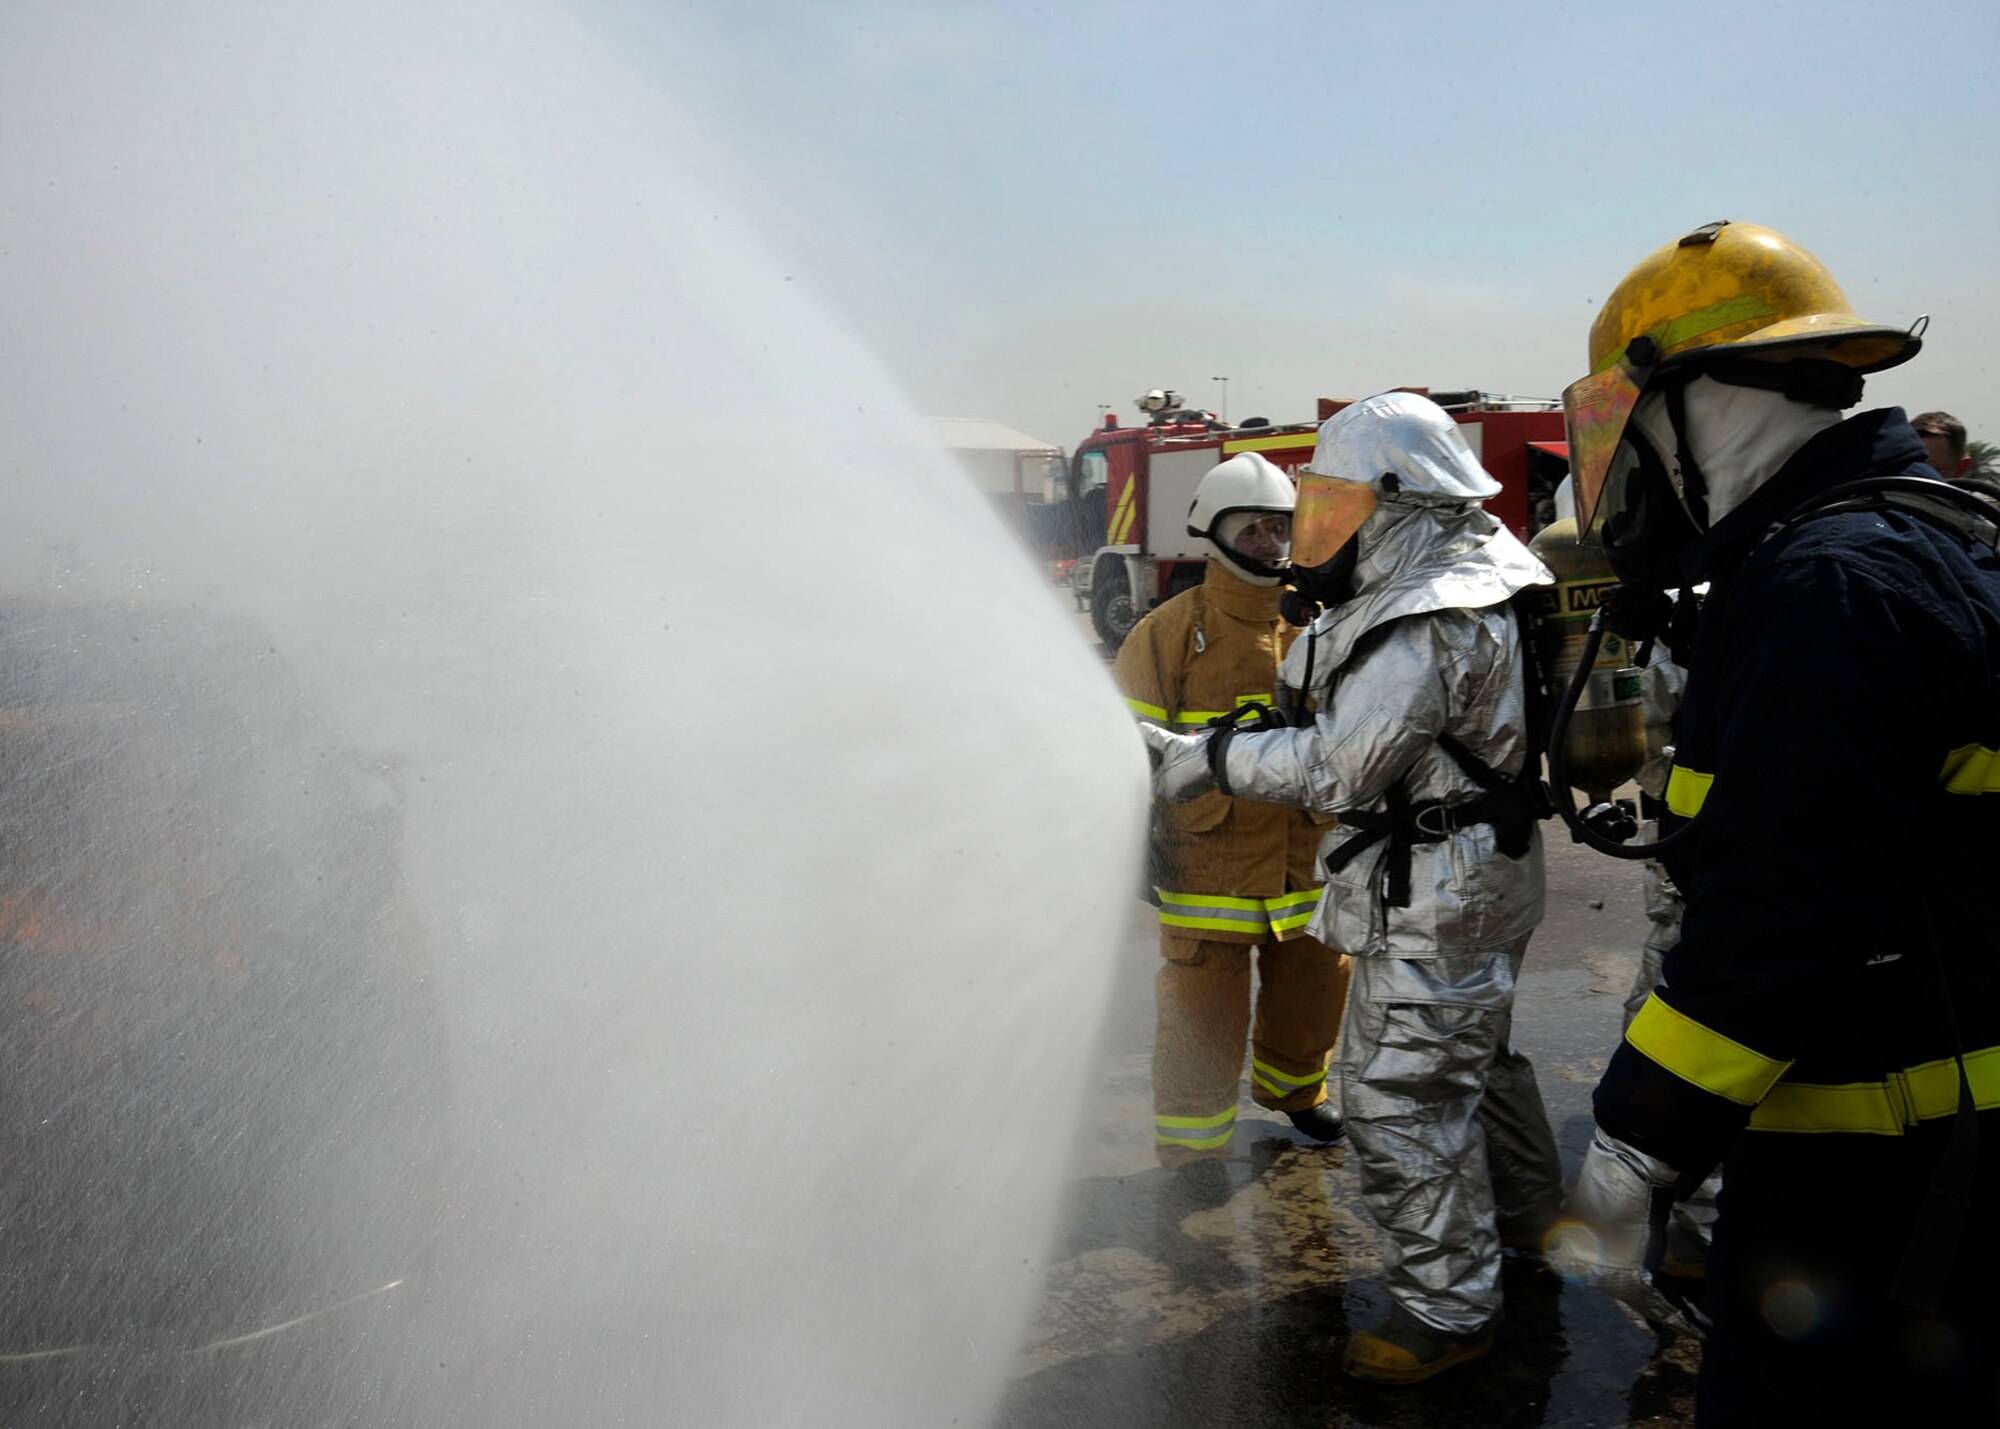 Tech. Sgt. Jay Wingfield (right), 821st Basic Technical Training Squadron Coalition Air Force Transition  Team fire rescue advisor, asses the trainees of the Basic Fire Course in Baghdad, Iraq April 11, 2009. Sergeant Wingfield is advising members of the Iraqi air force and Iraqi civil defense on their techniques during a live-burn exercise at the Iraqi Joint Fire Academy.  26 students will become fire fighters after the completion of the two-month course. Sergeant Wingfield is deployed from Goodfellow Air Force Base, Texas and is a native of Peoria, Ill.  (U.S. Air Force photo by Senior Airman Jacqueline Romero)